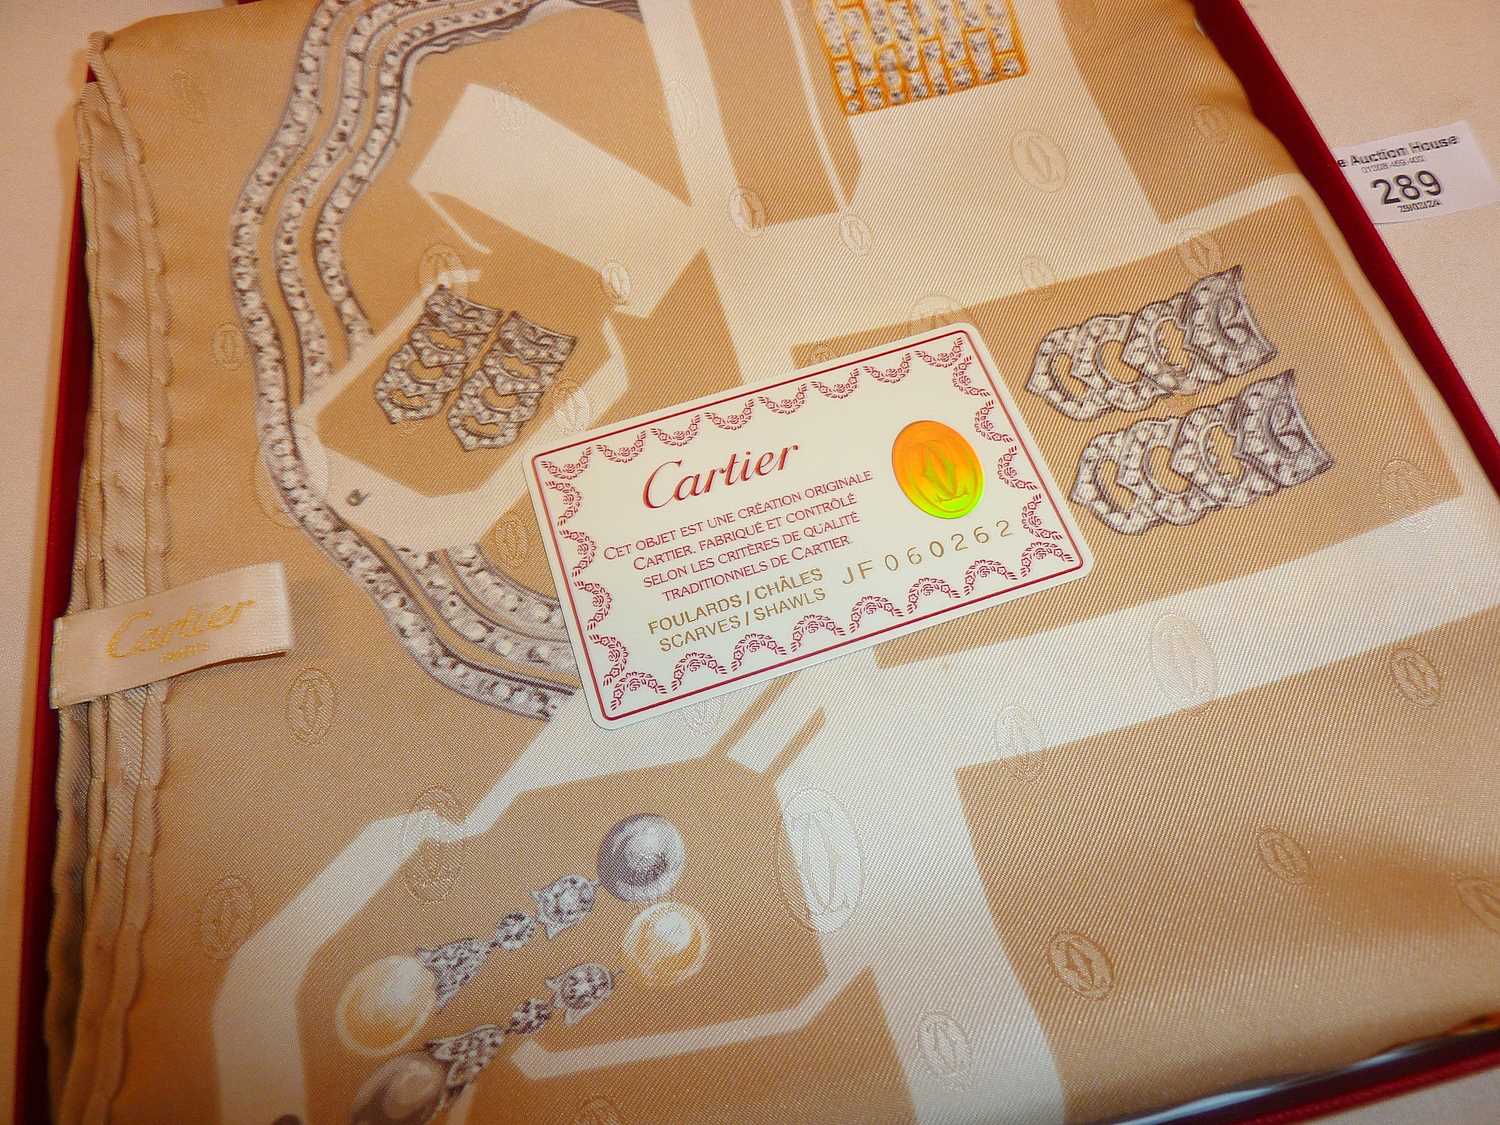 Authentic Cartier silk scarf in box with warranty card. All in an excellent condition, with a - Image 5 of 6